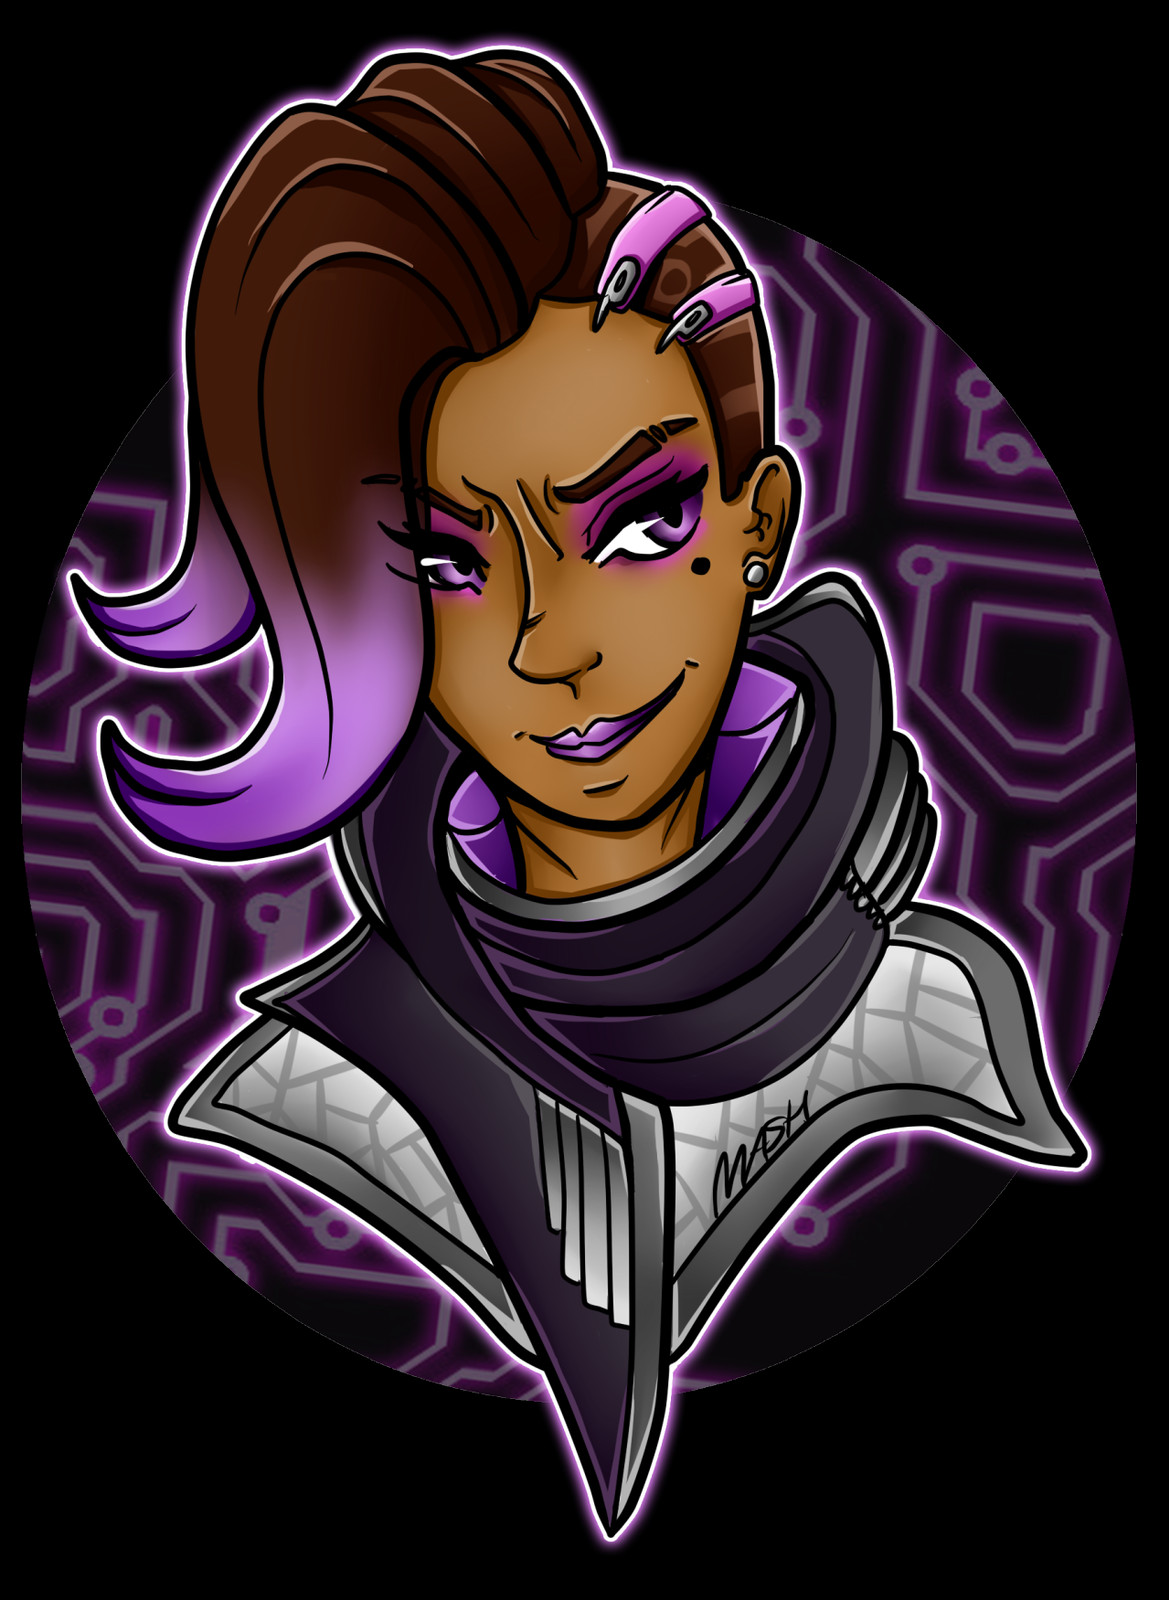 Download Sombra PNG Image with No Background - PNGkey.com